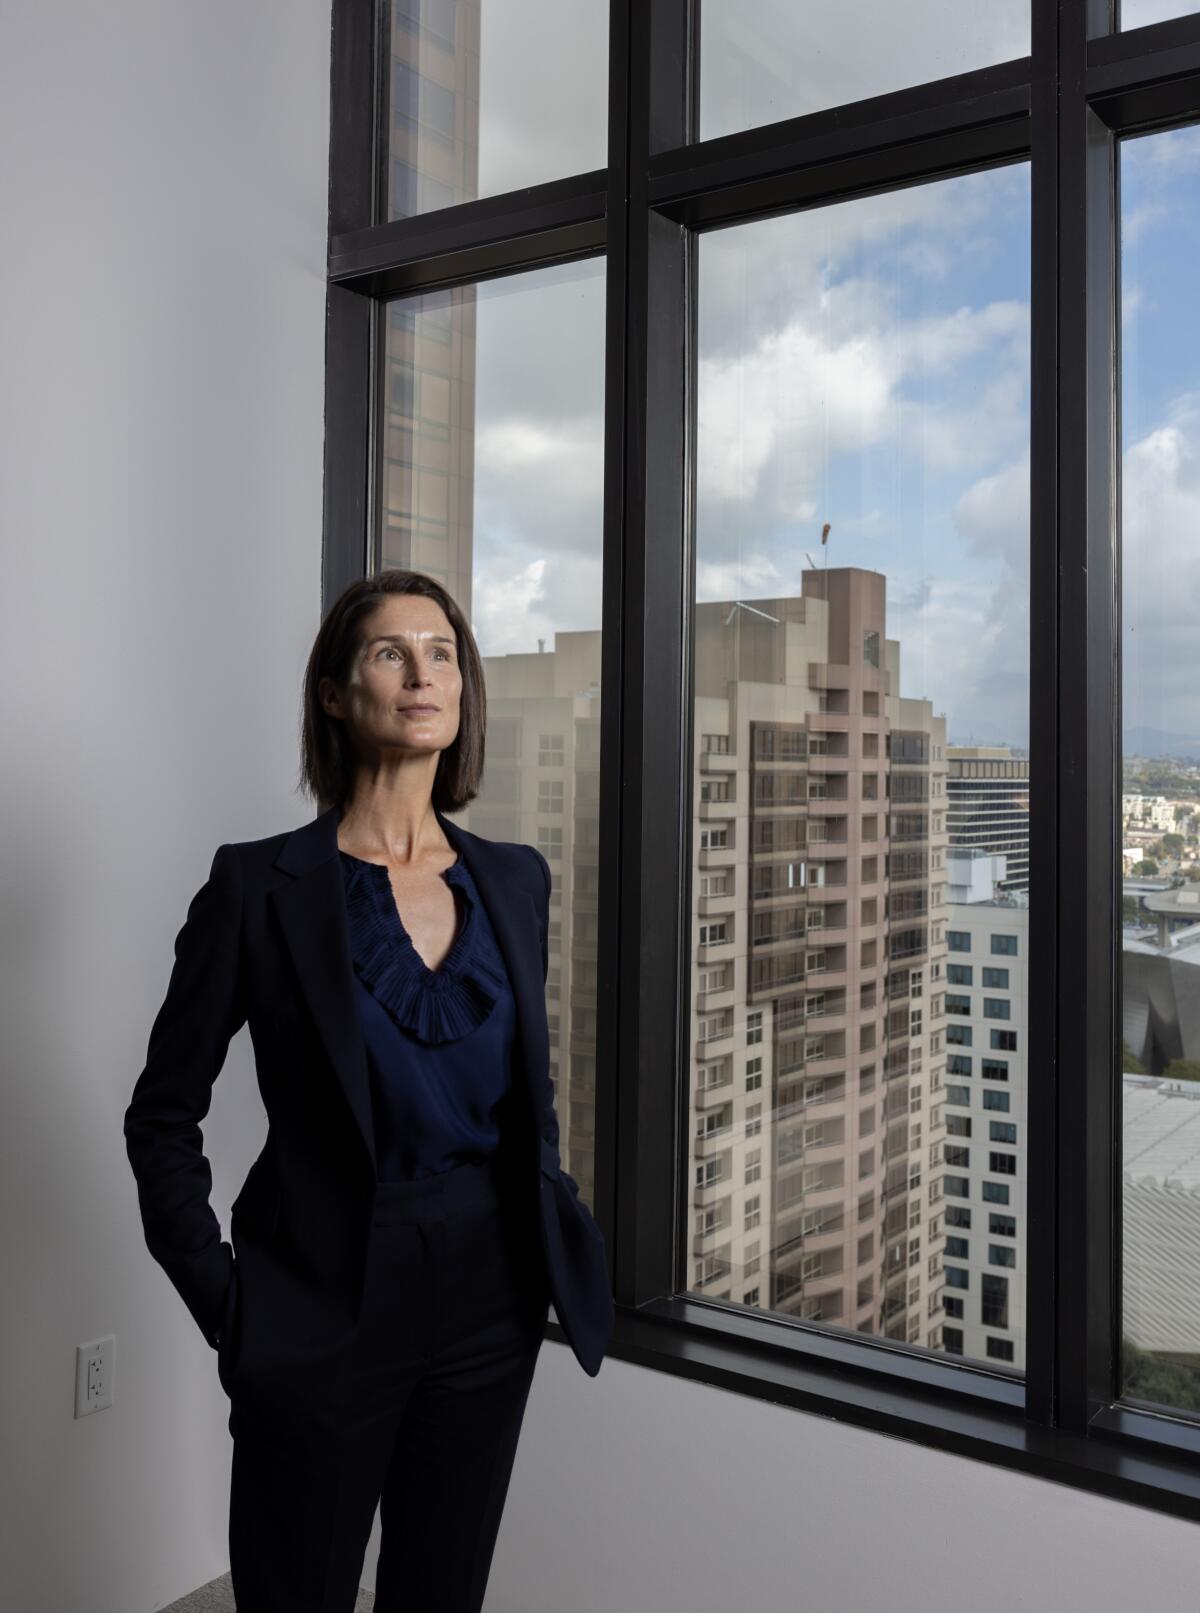 A woman standing in a white room, next to a large window with a city view of tall buildings below